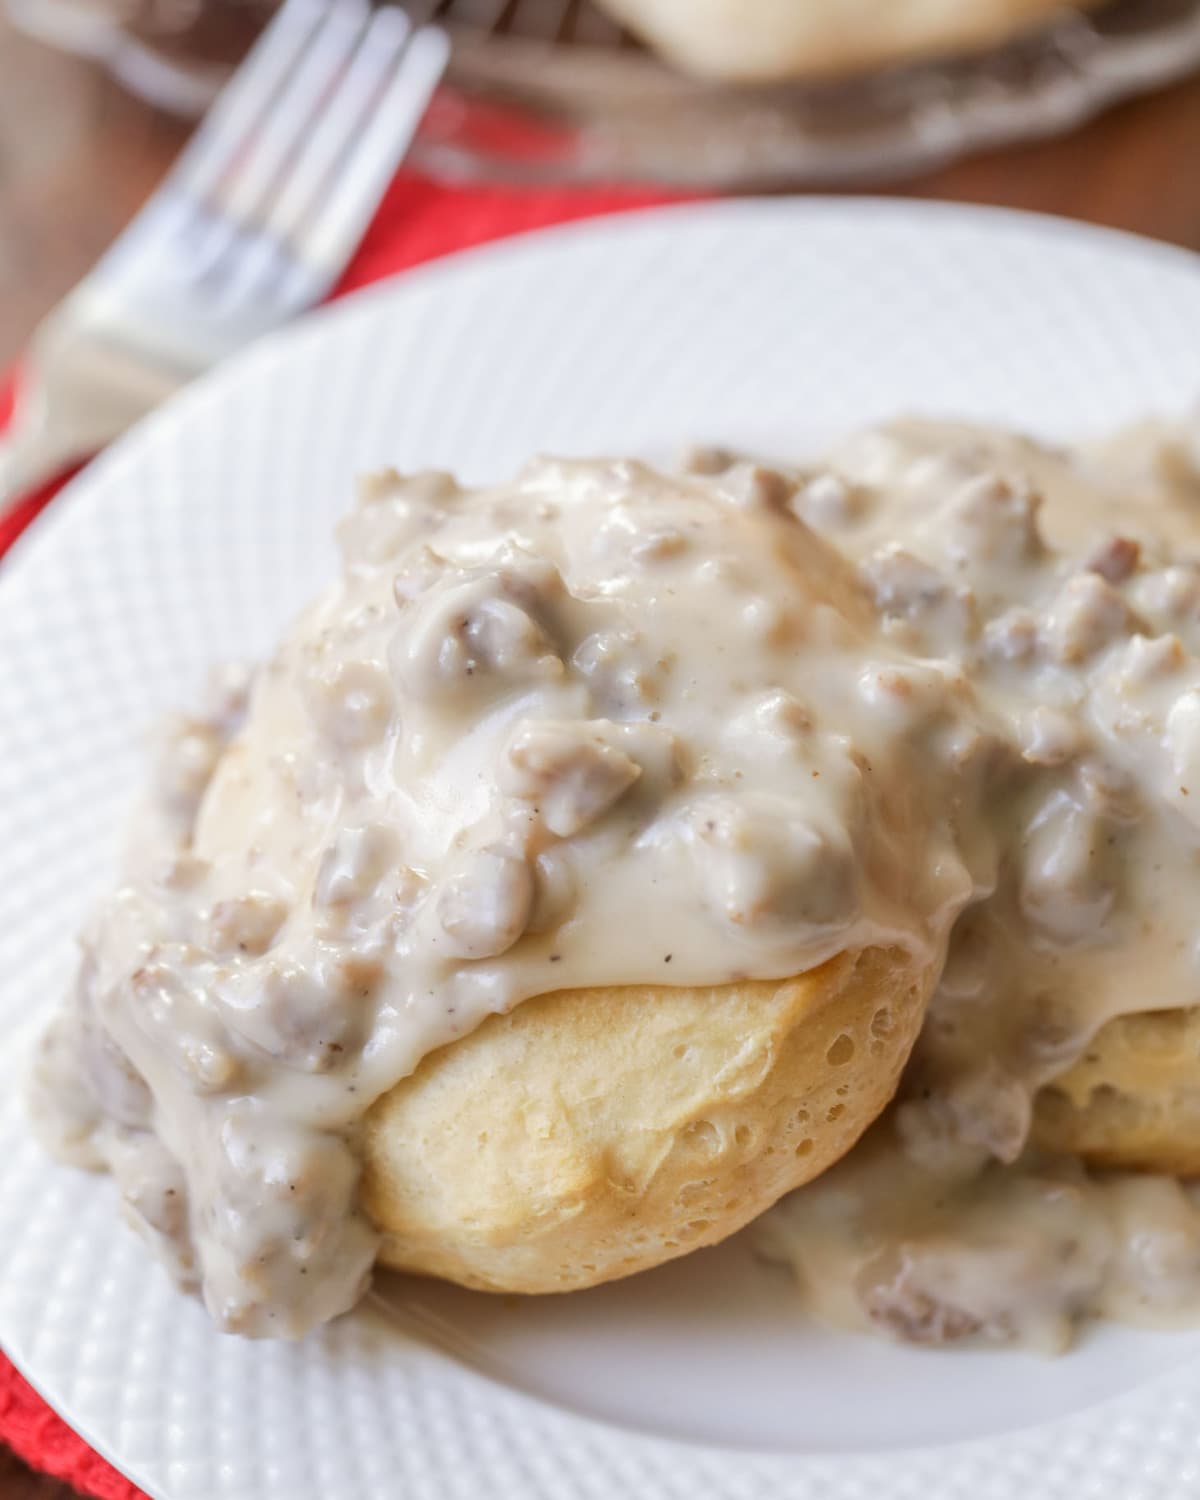 Sausage Gravy and Biscuits Recipe on plate